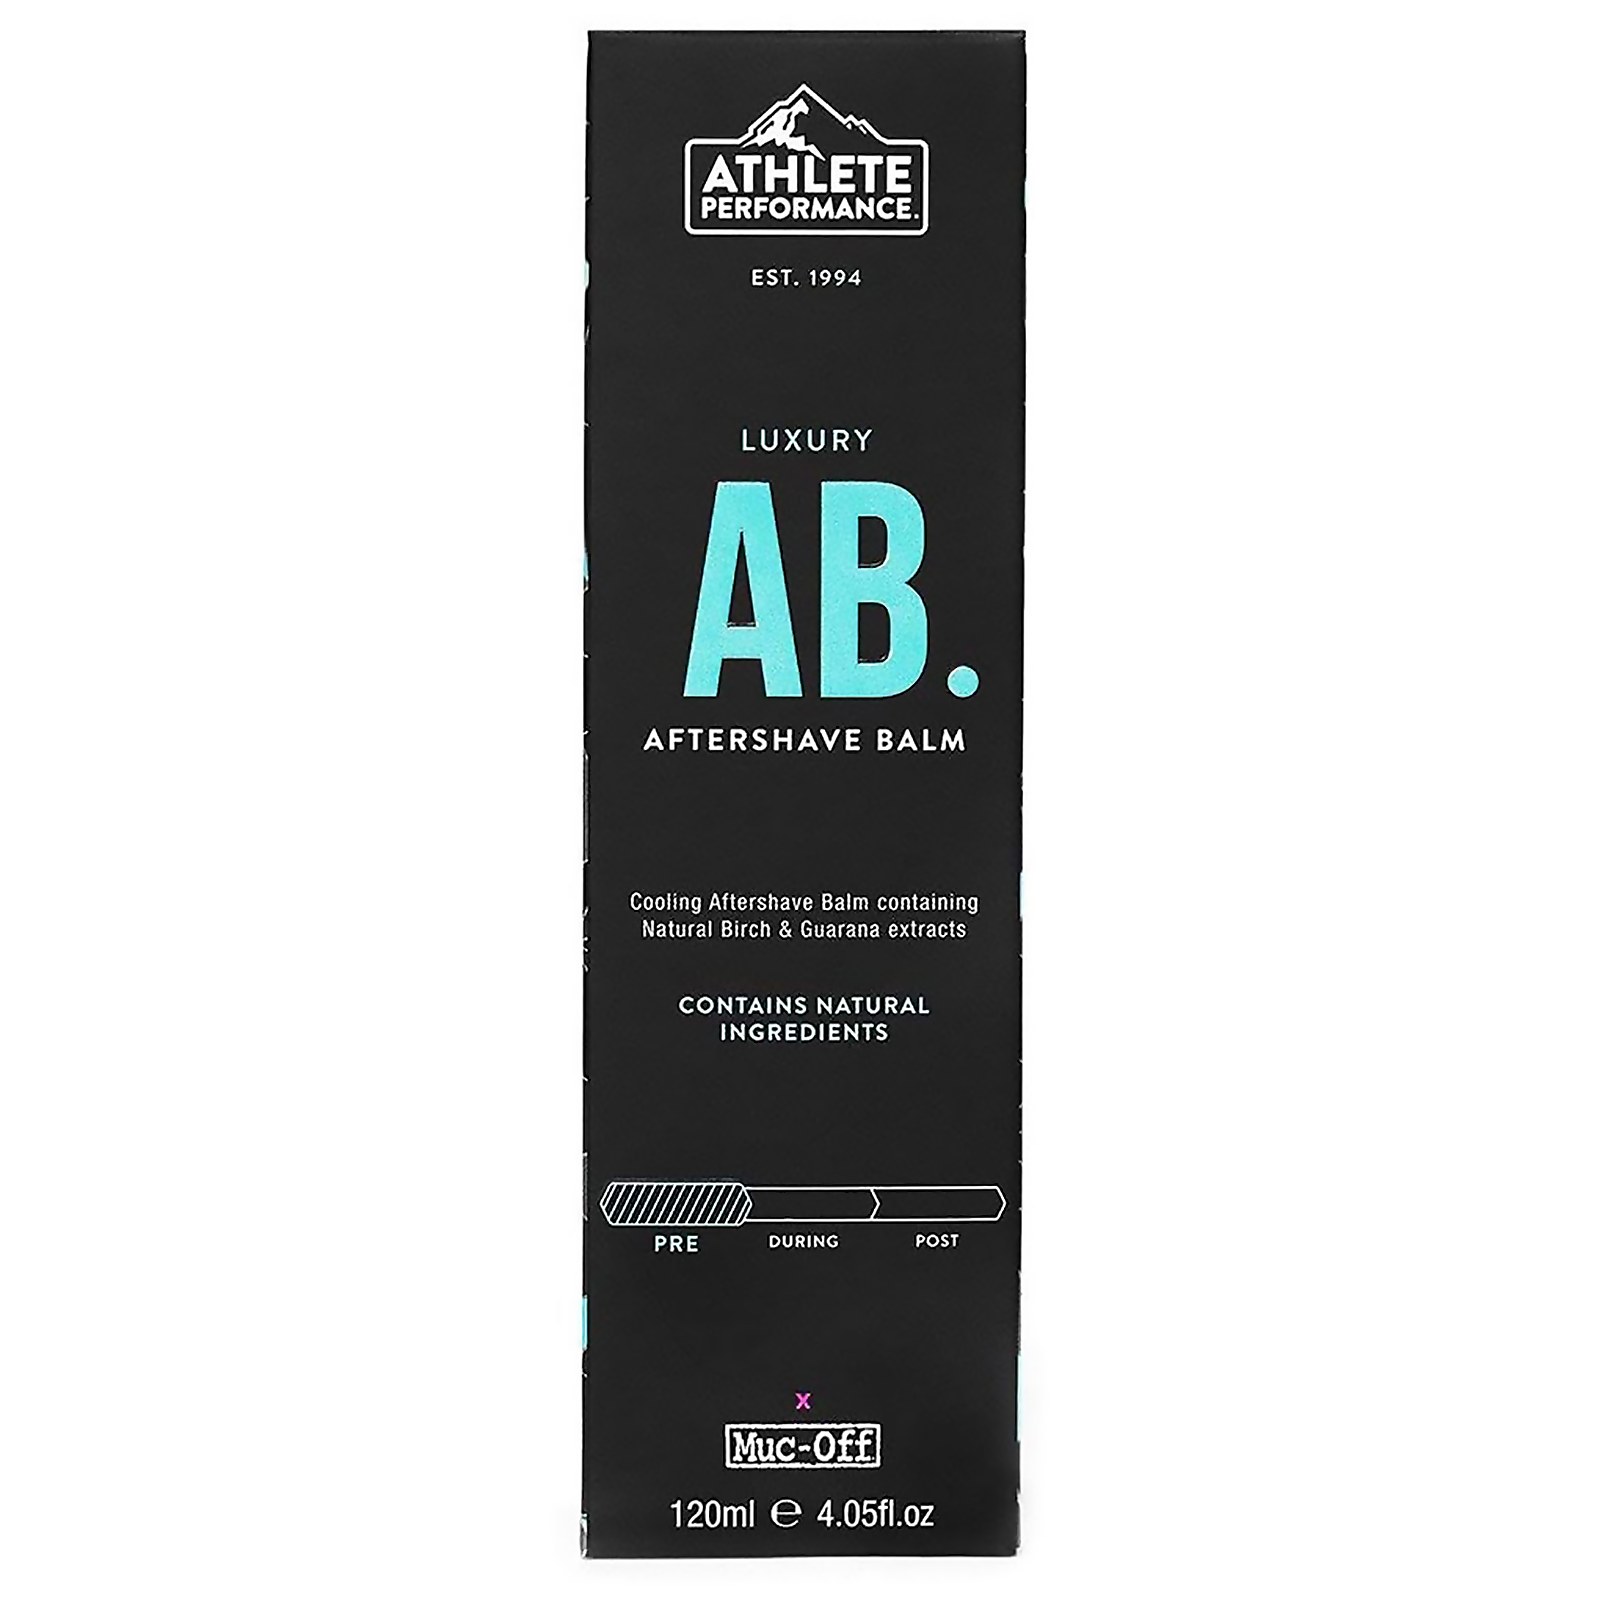 Muc-Off Athlete Performance Aftershave Balm 120ml